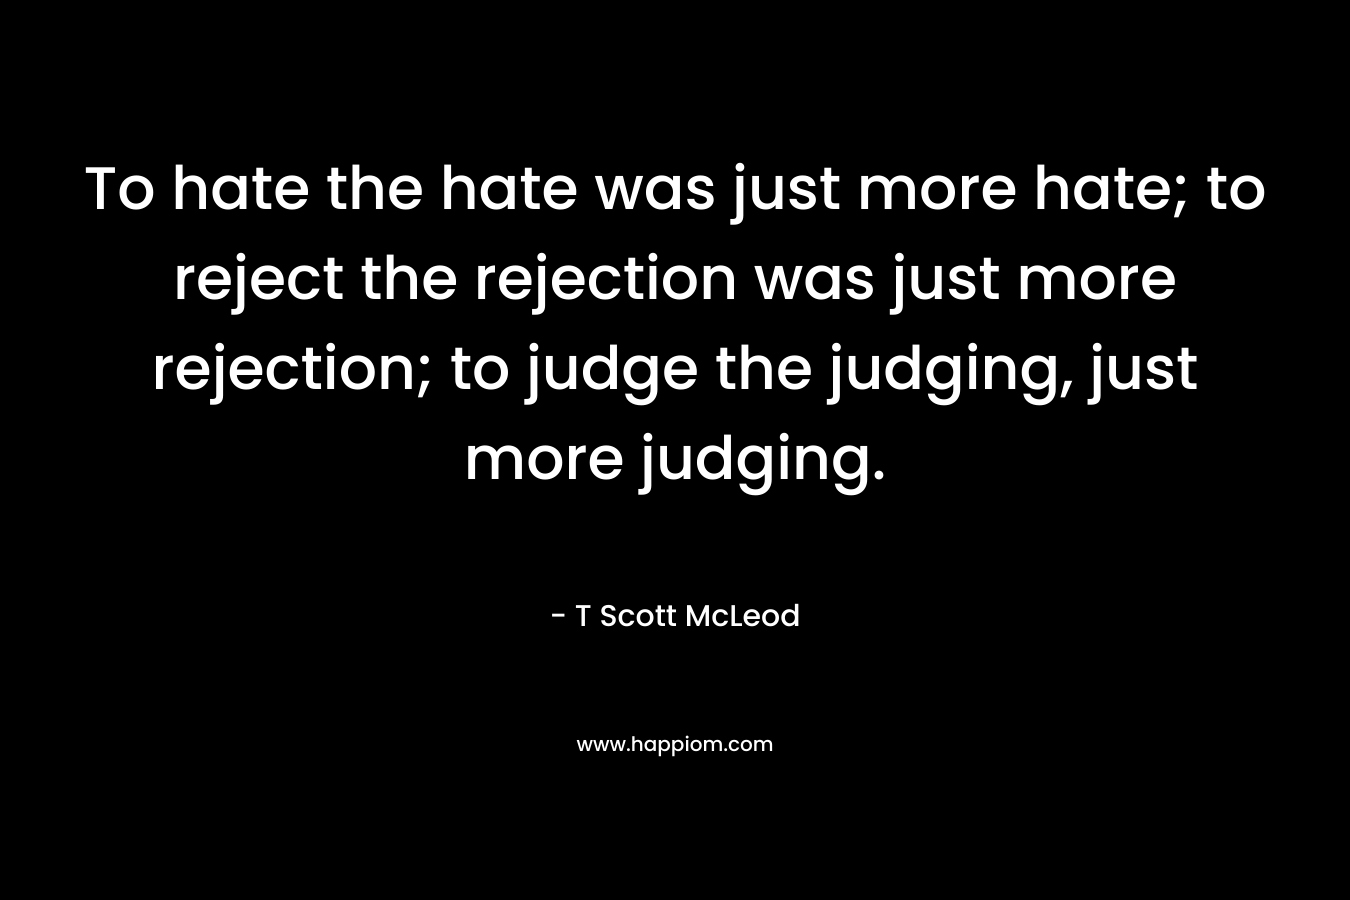 To hate the hate was just more hate; to reject the rejection was just more rejection; to judge the judging, just more judging.